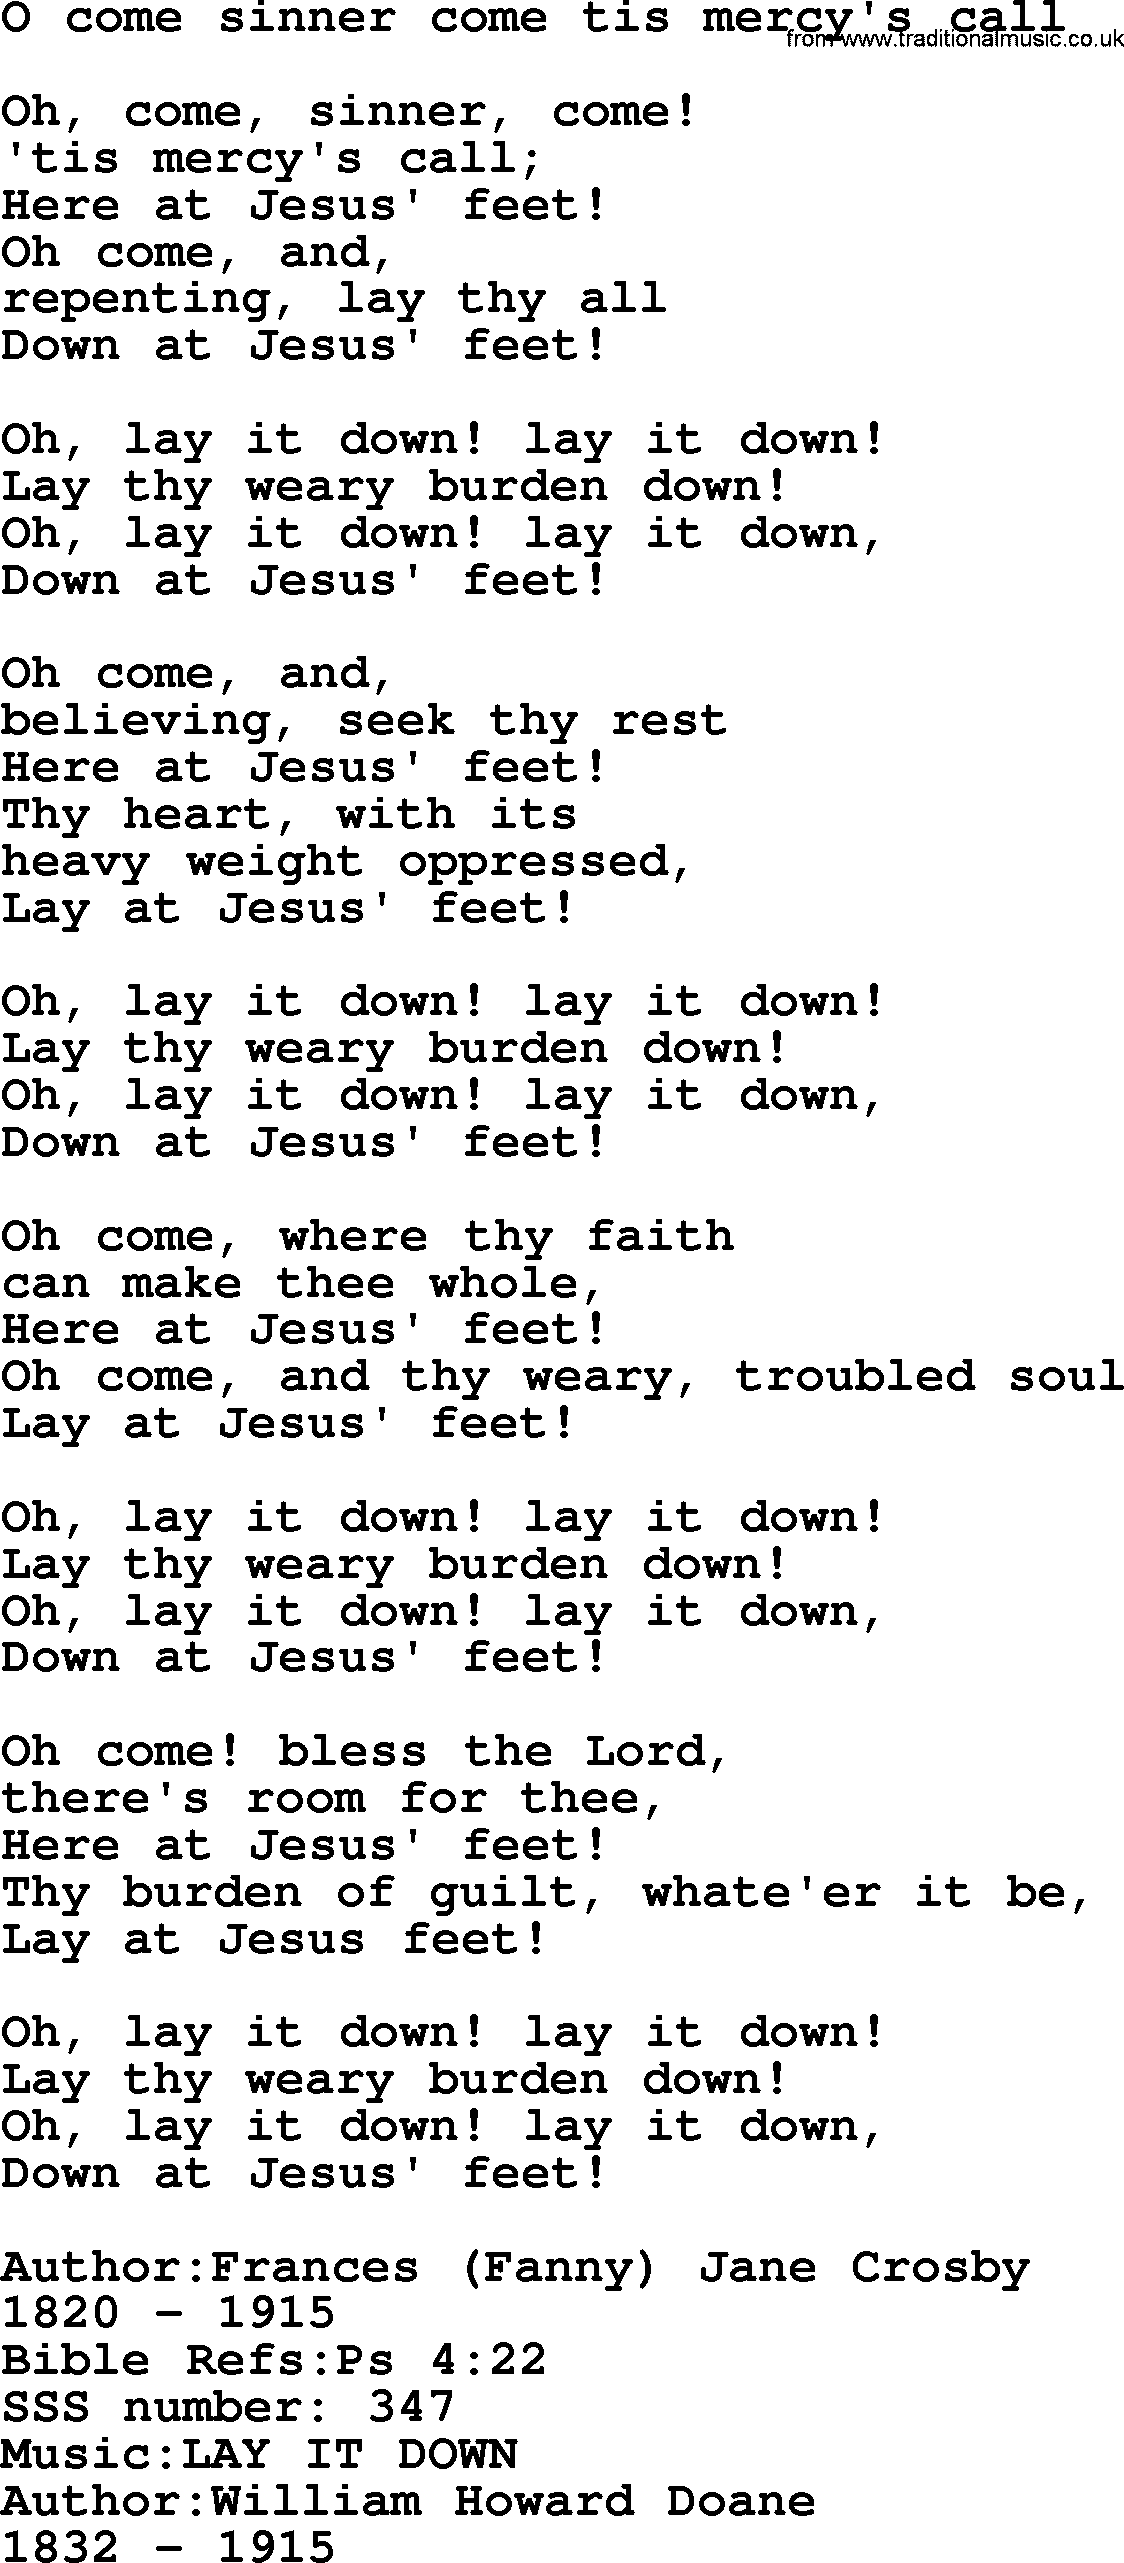 Sacred Songs and Solos complete, 1200 Hymns, title: O Come Sinner Come Tis Mercy's Call, lyrics and PDF